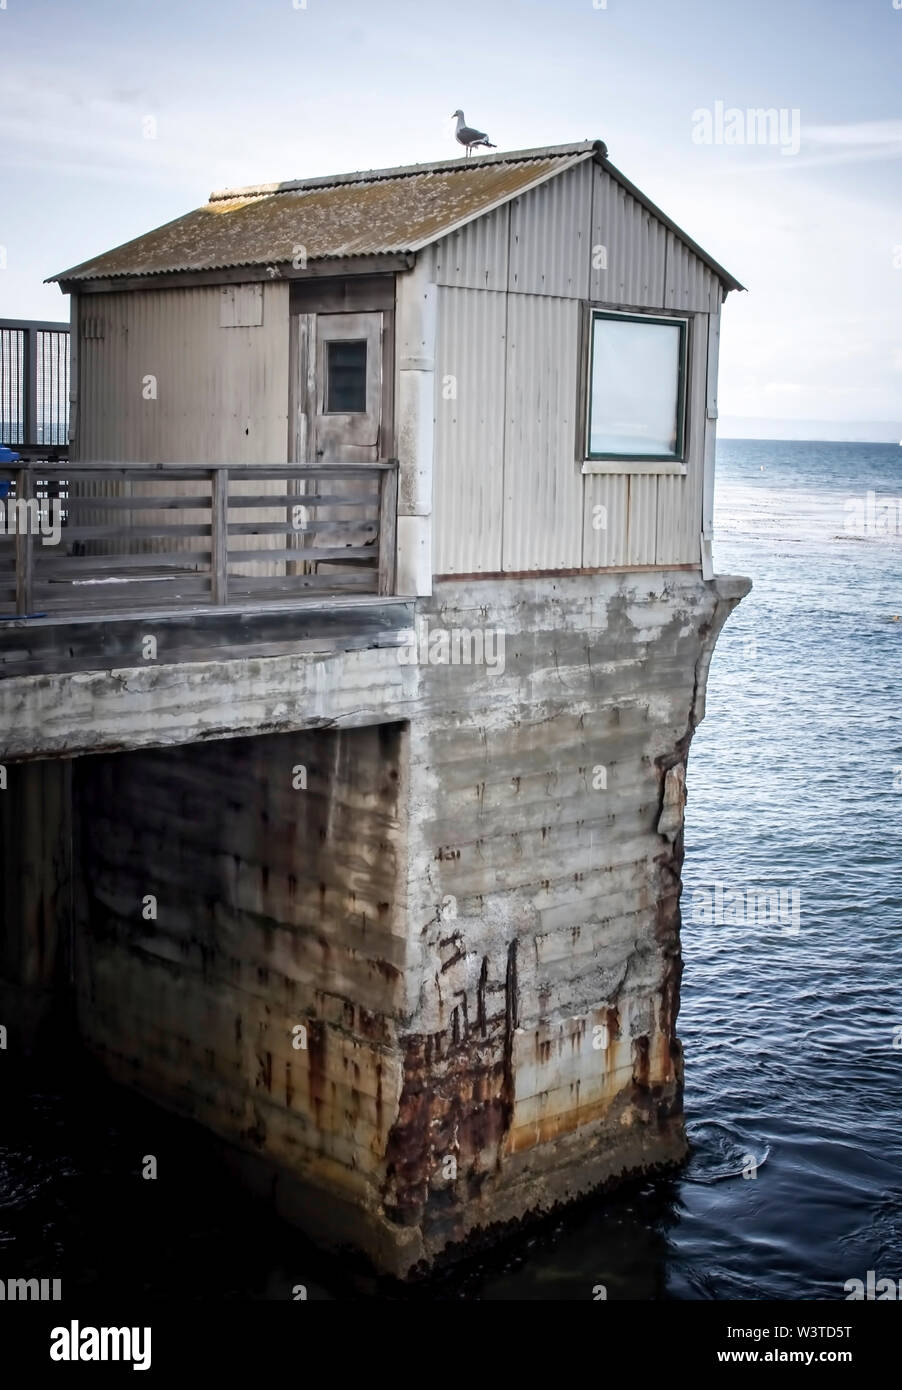 Single gull sits on old rusting building at end of pier in California seascape. Stock Photo